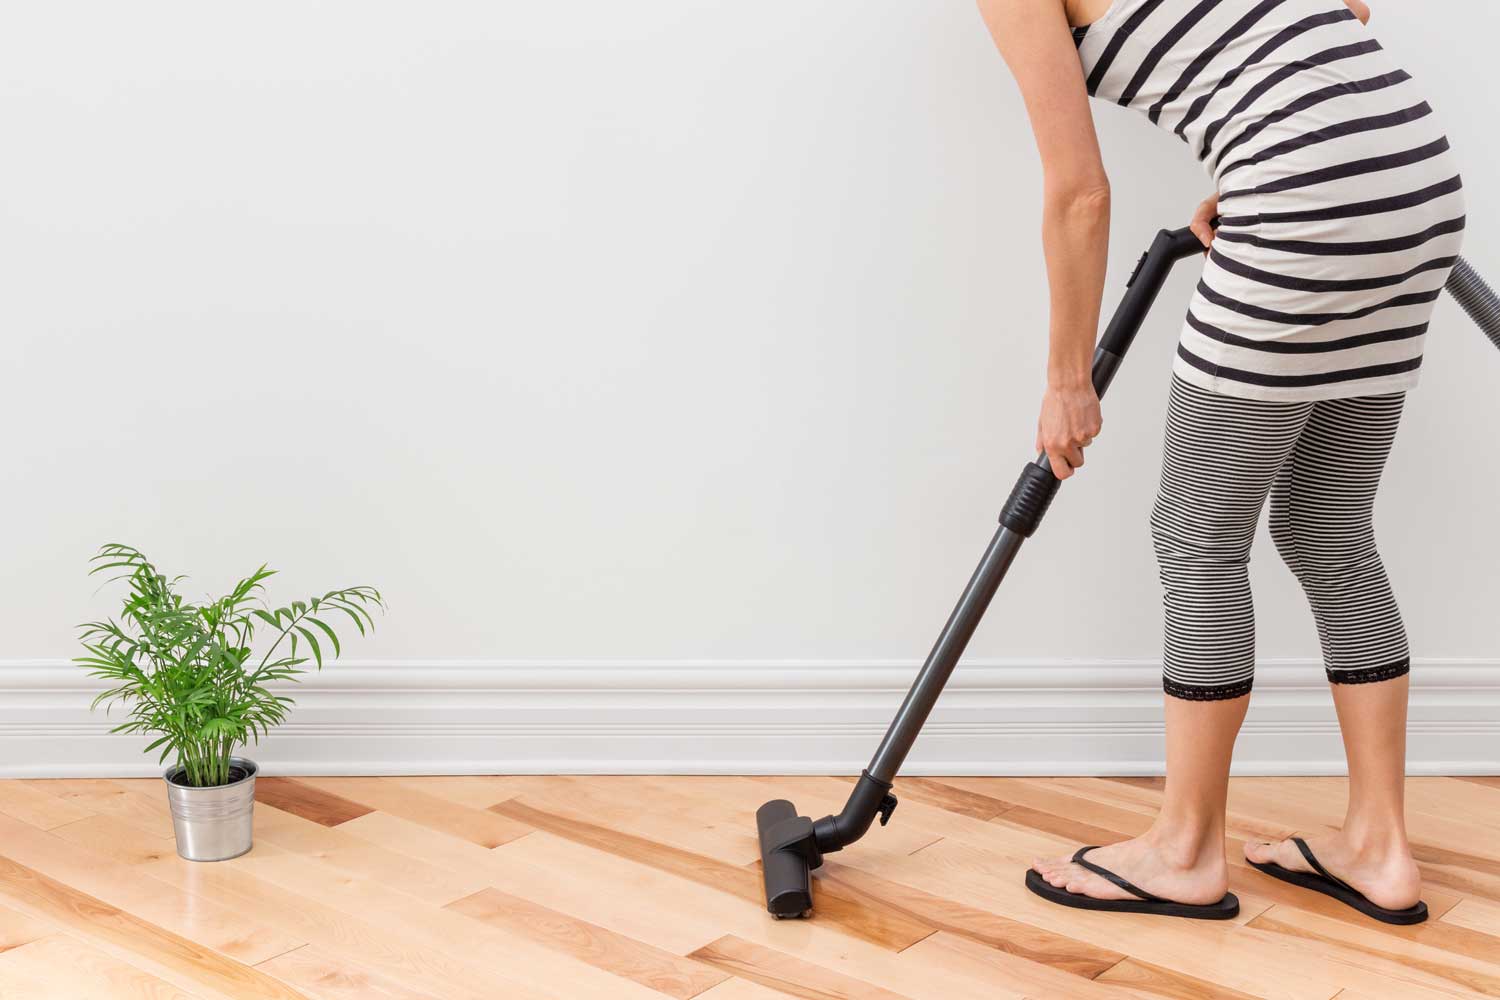 Regulary vacuum or sweep floors to remove dirt and keep your home floors looking amazing - tips from Footprints Floors in Alexandria.